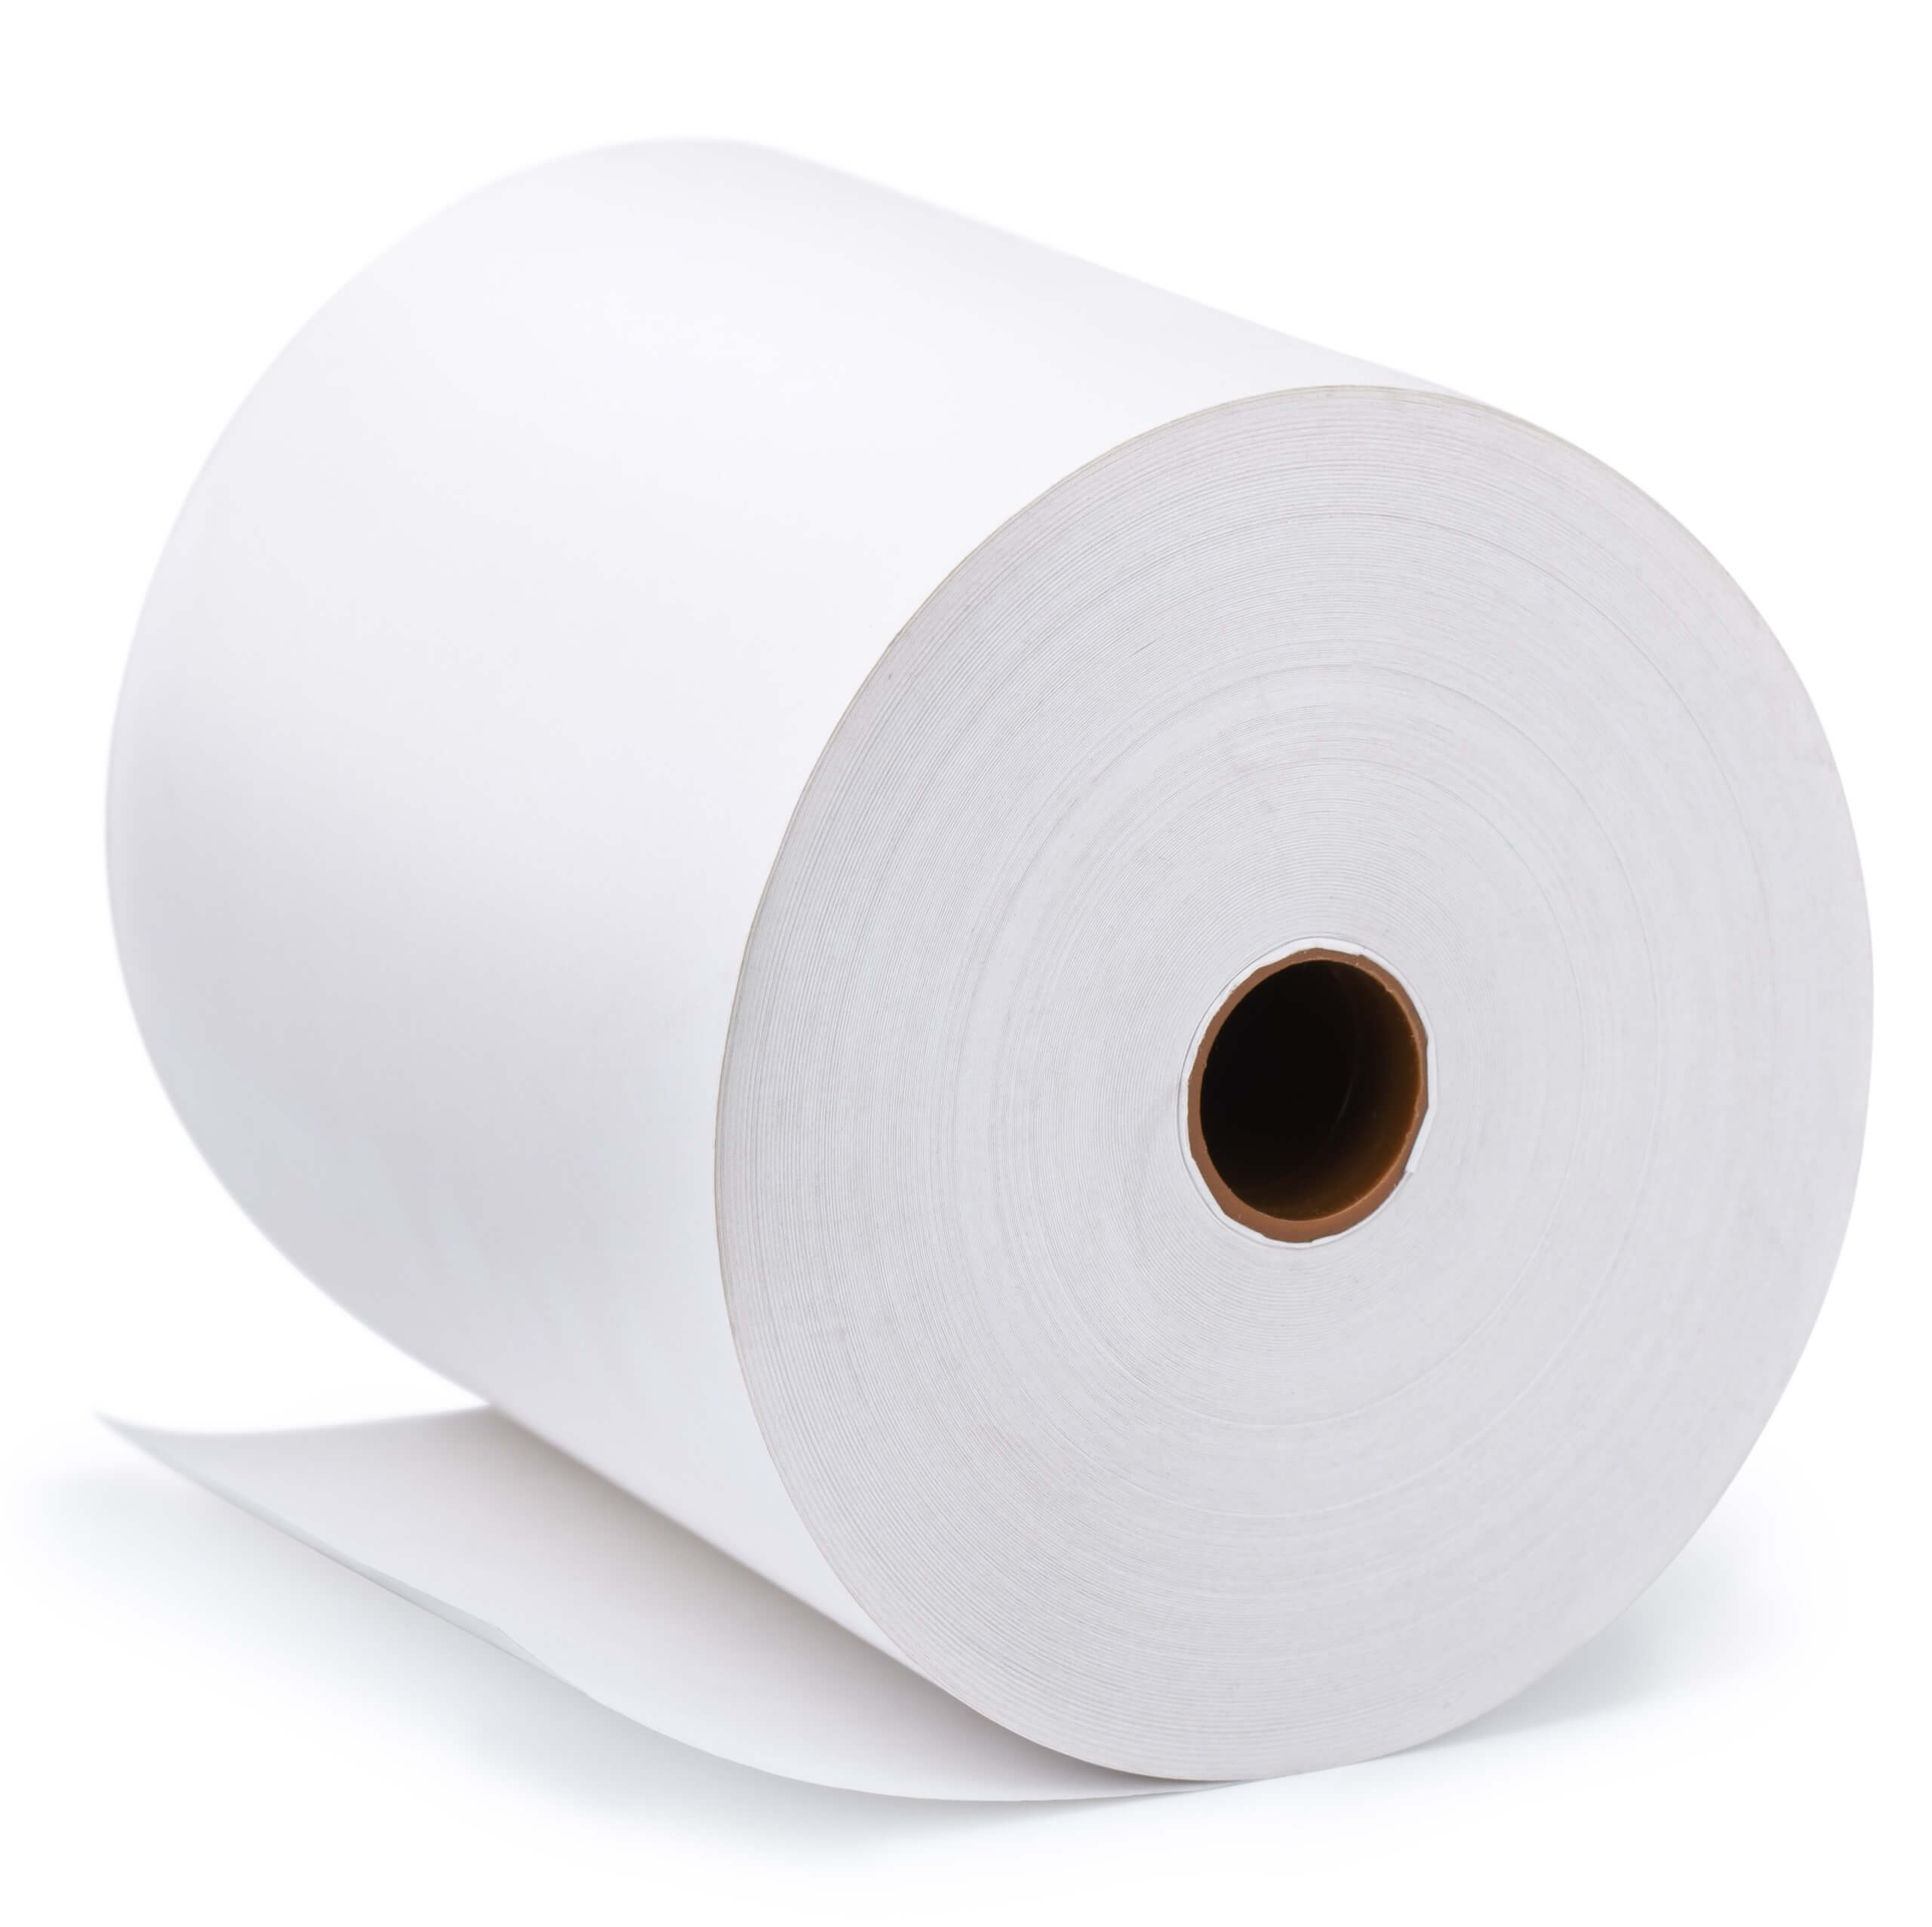 An image of one of our Till Receipt Rolls.